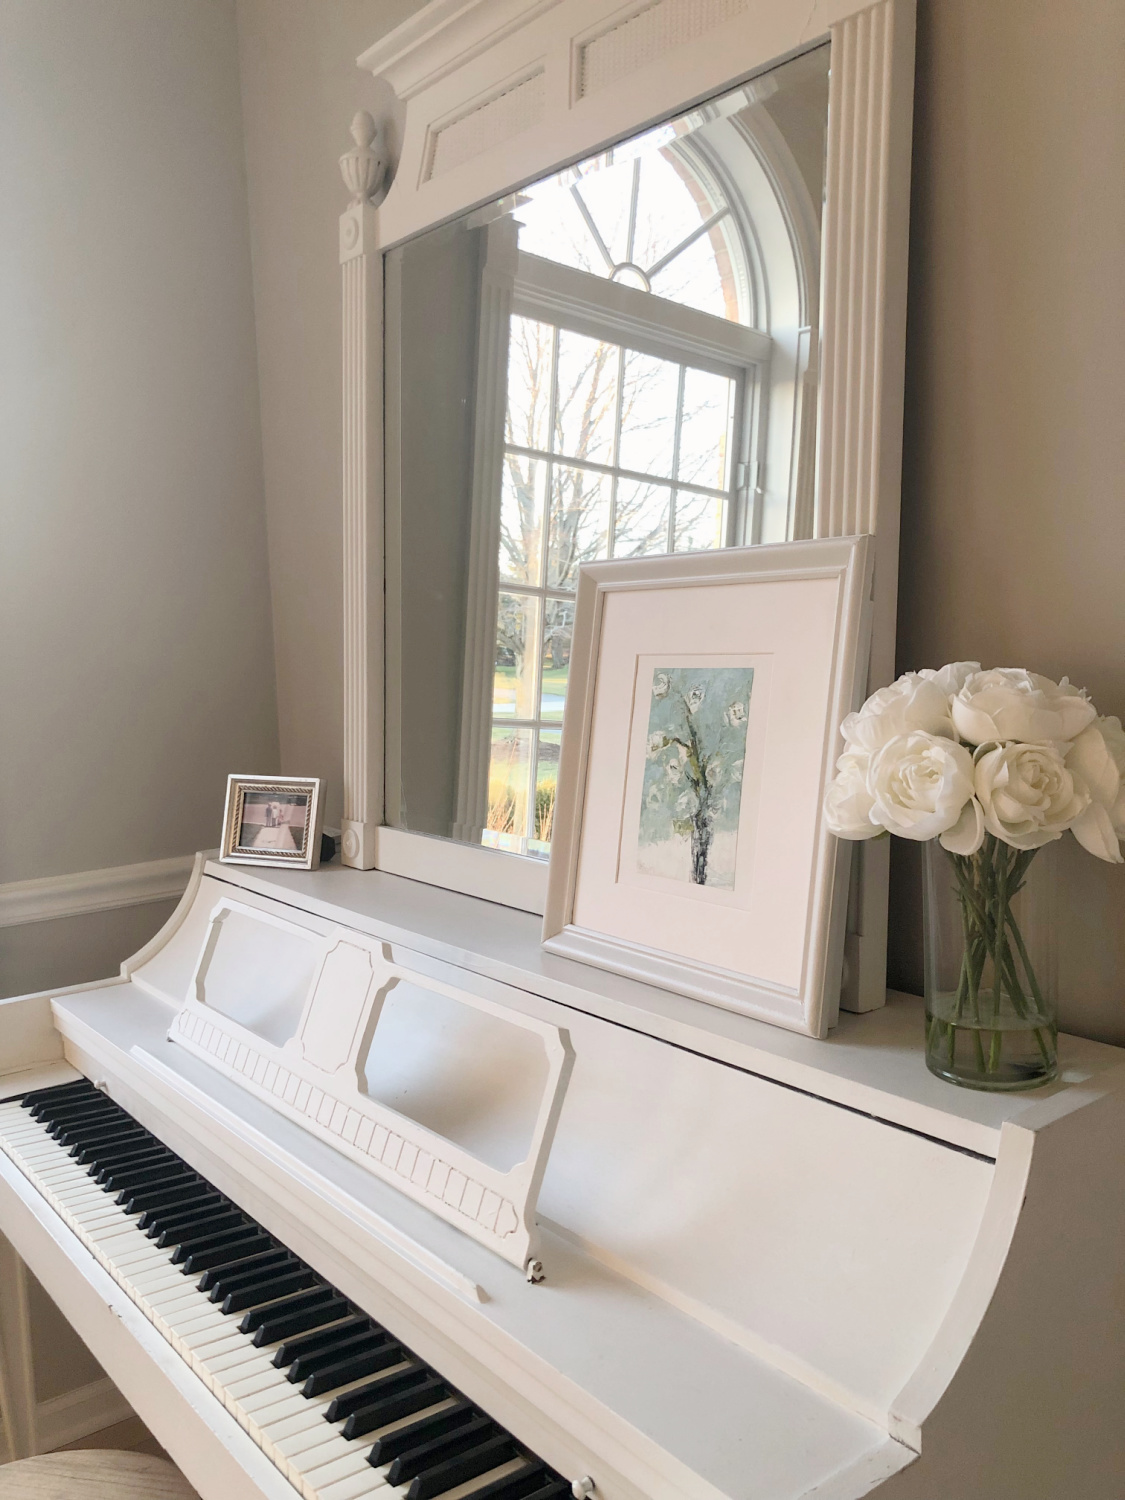 Serene music room with white piano, Holly Irwin painting, and SW Repose Gray walls - Hello Lovely. #reposegray #hollyirwin